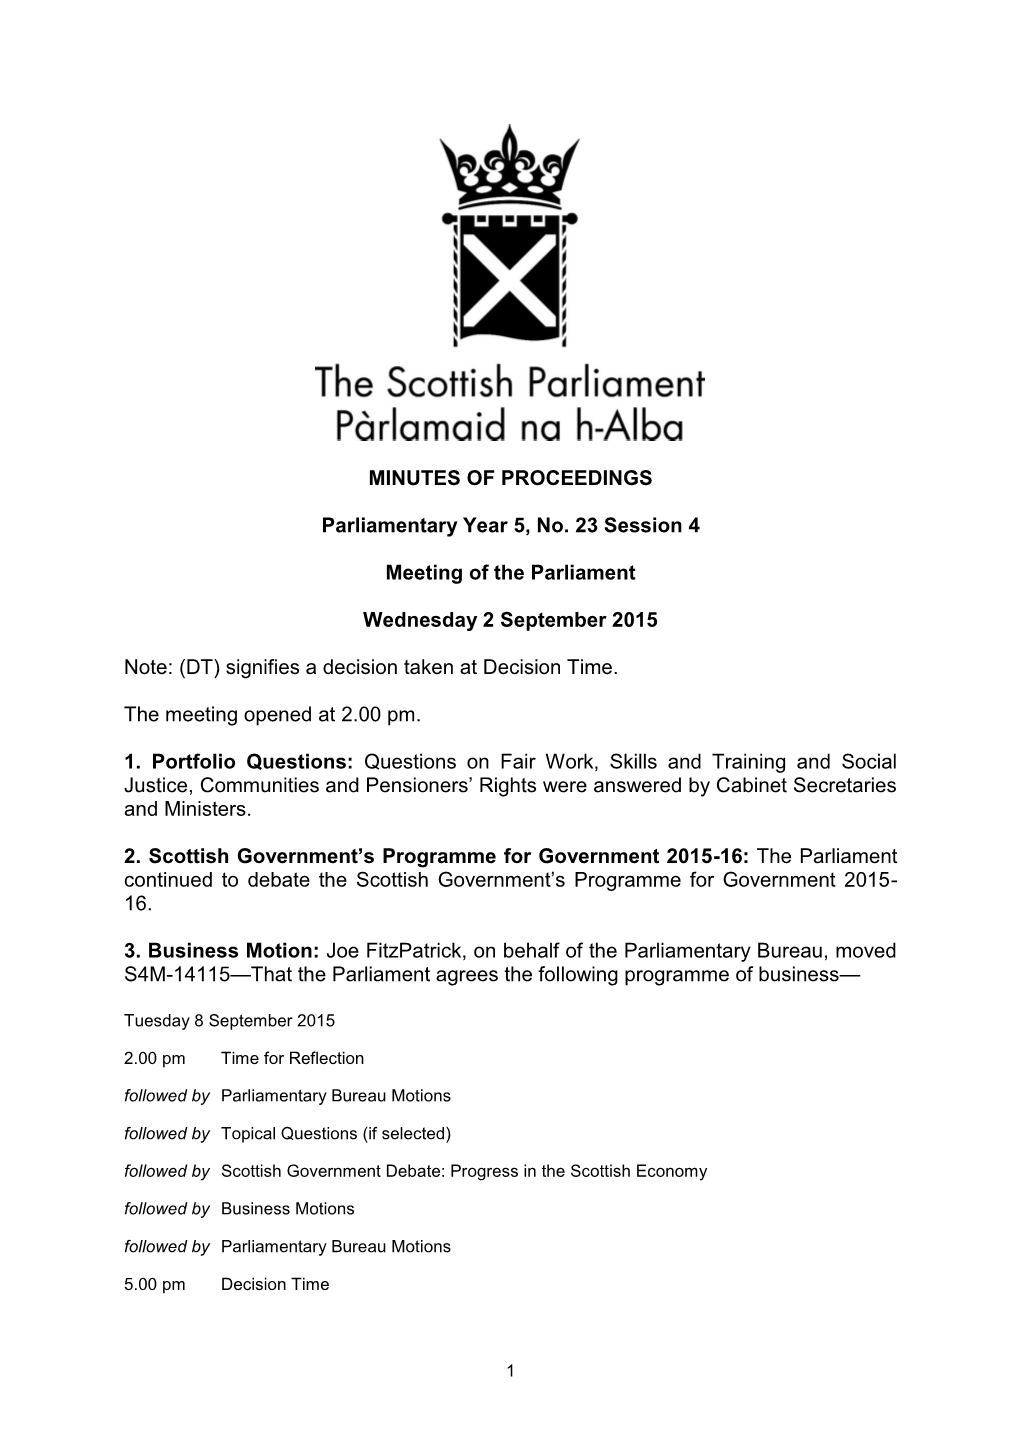 MINUTES of PROCEEDINGS Parliamentary Year 5, No. 23